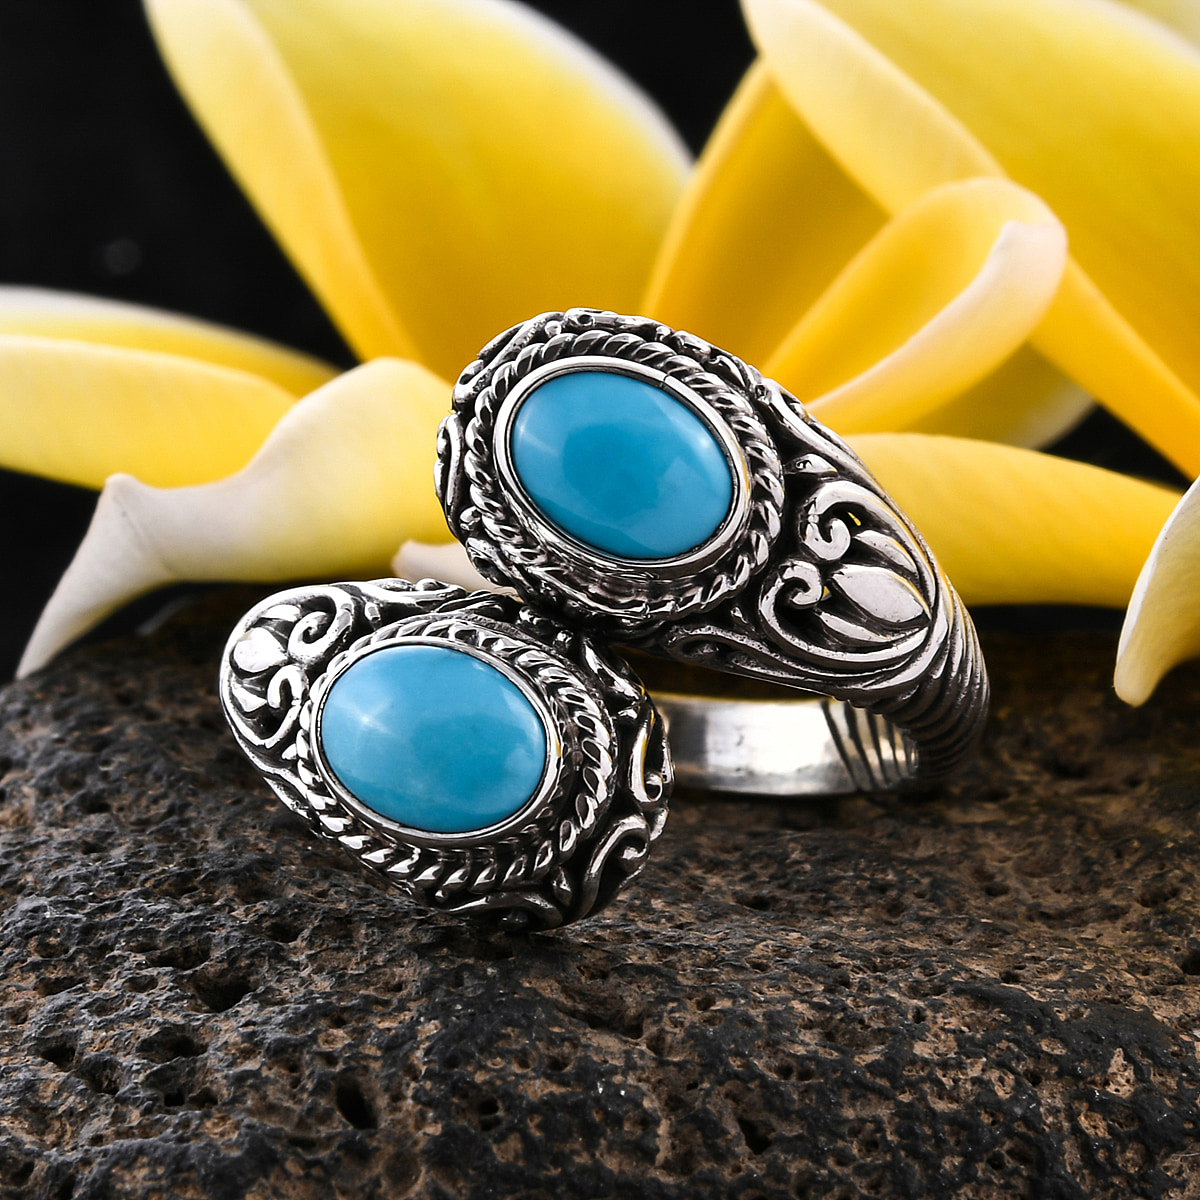 Royal Bali Collection Sleeping Beauty Turquoise Ring in Sterling  Silver,2.50 Ct